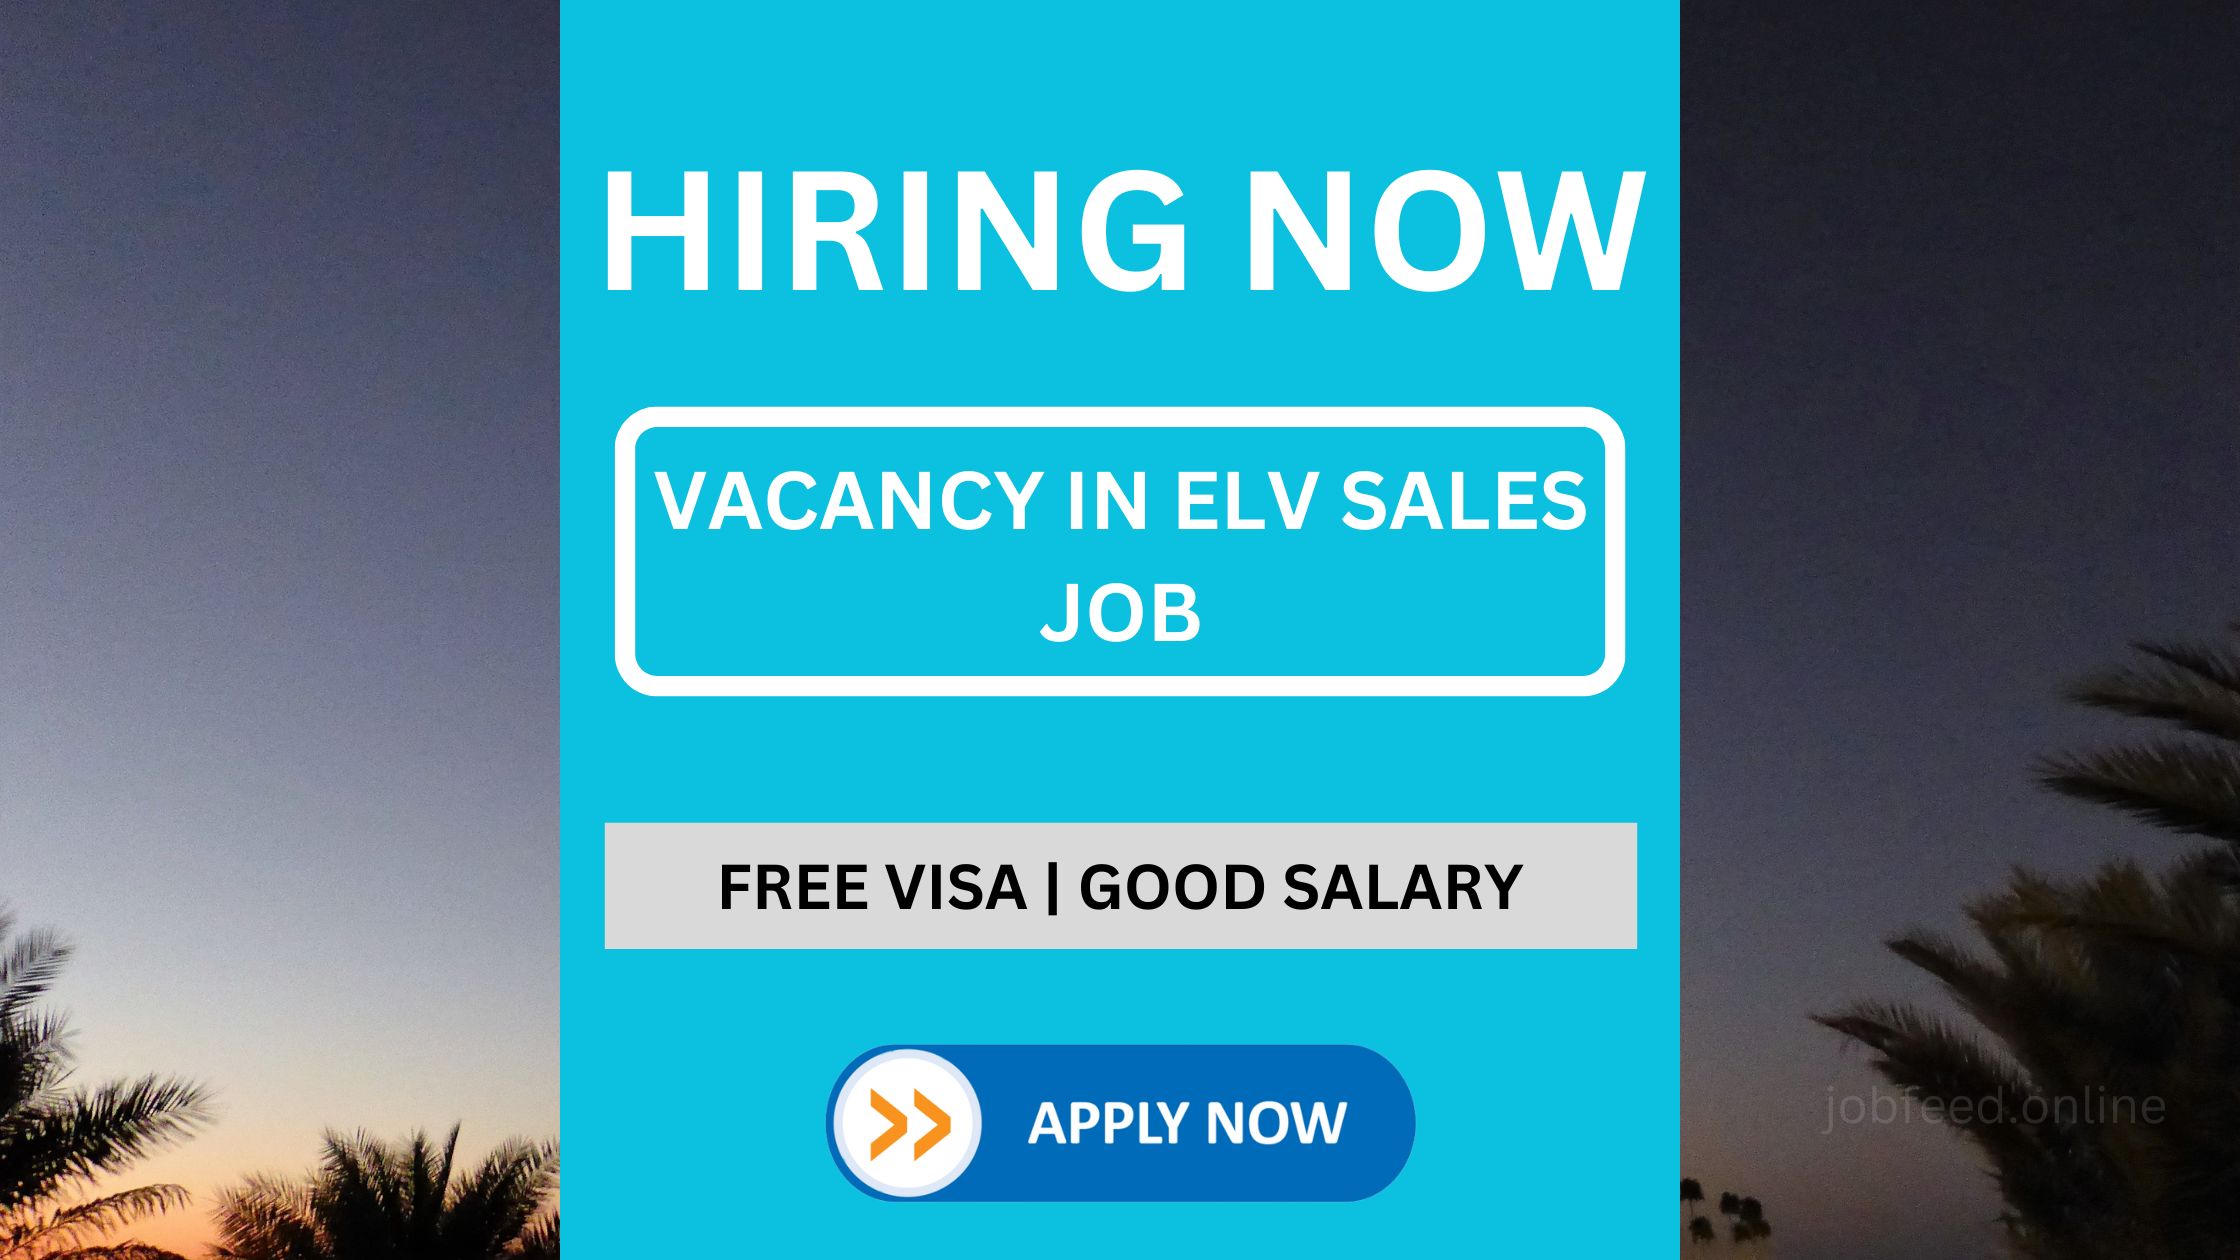 Vacancy in ELV Sales - 2000 Salary with Commission and Free Visa